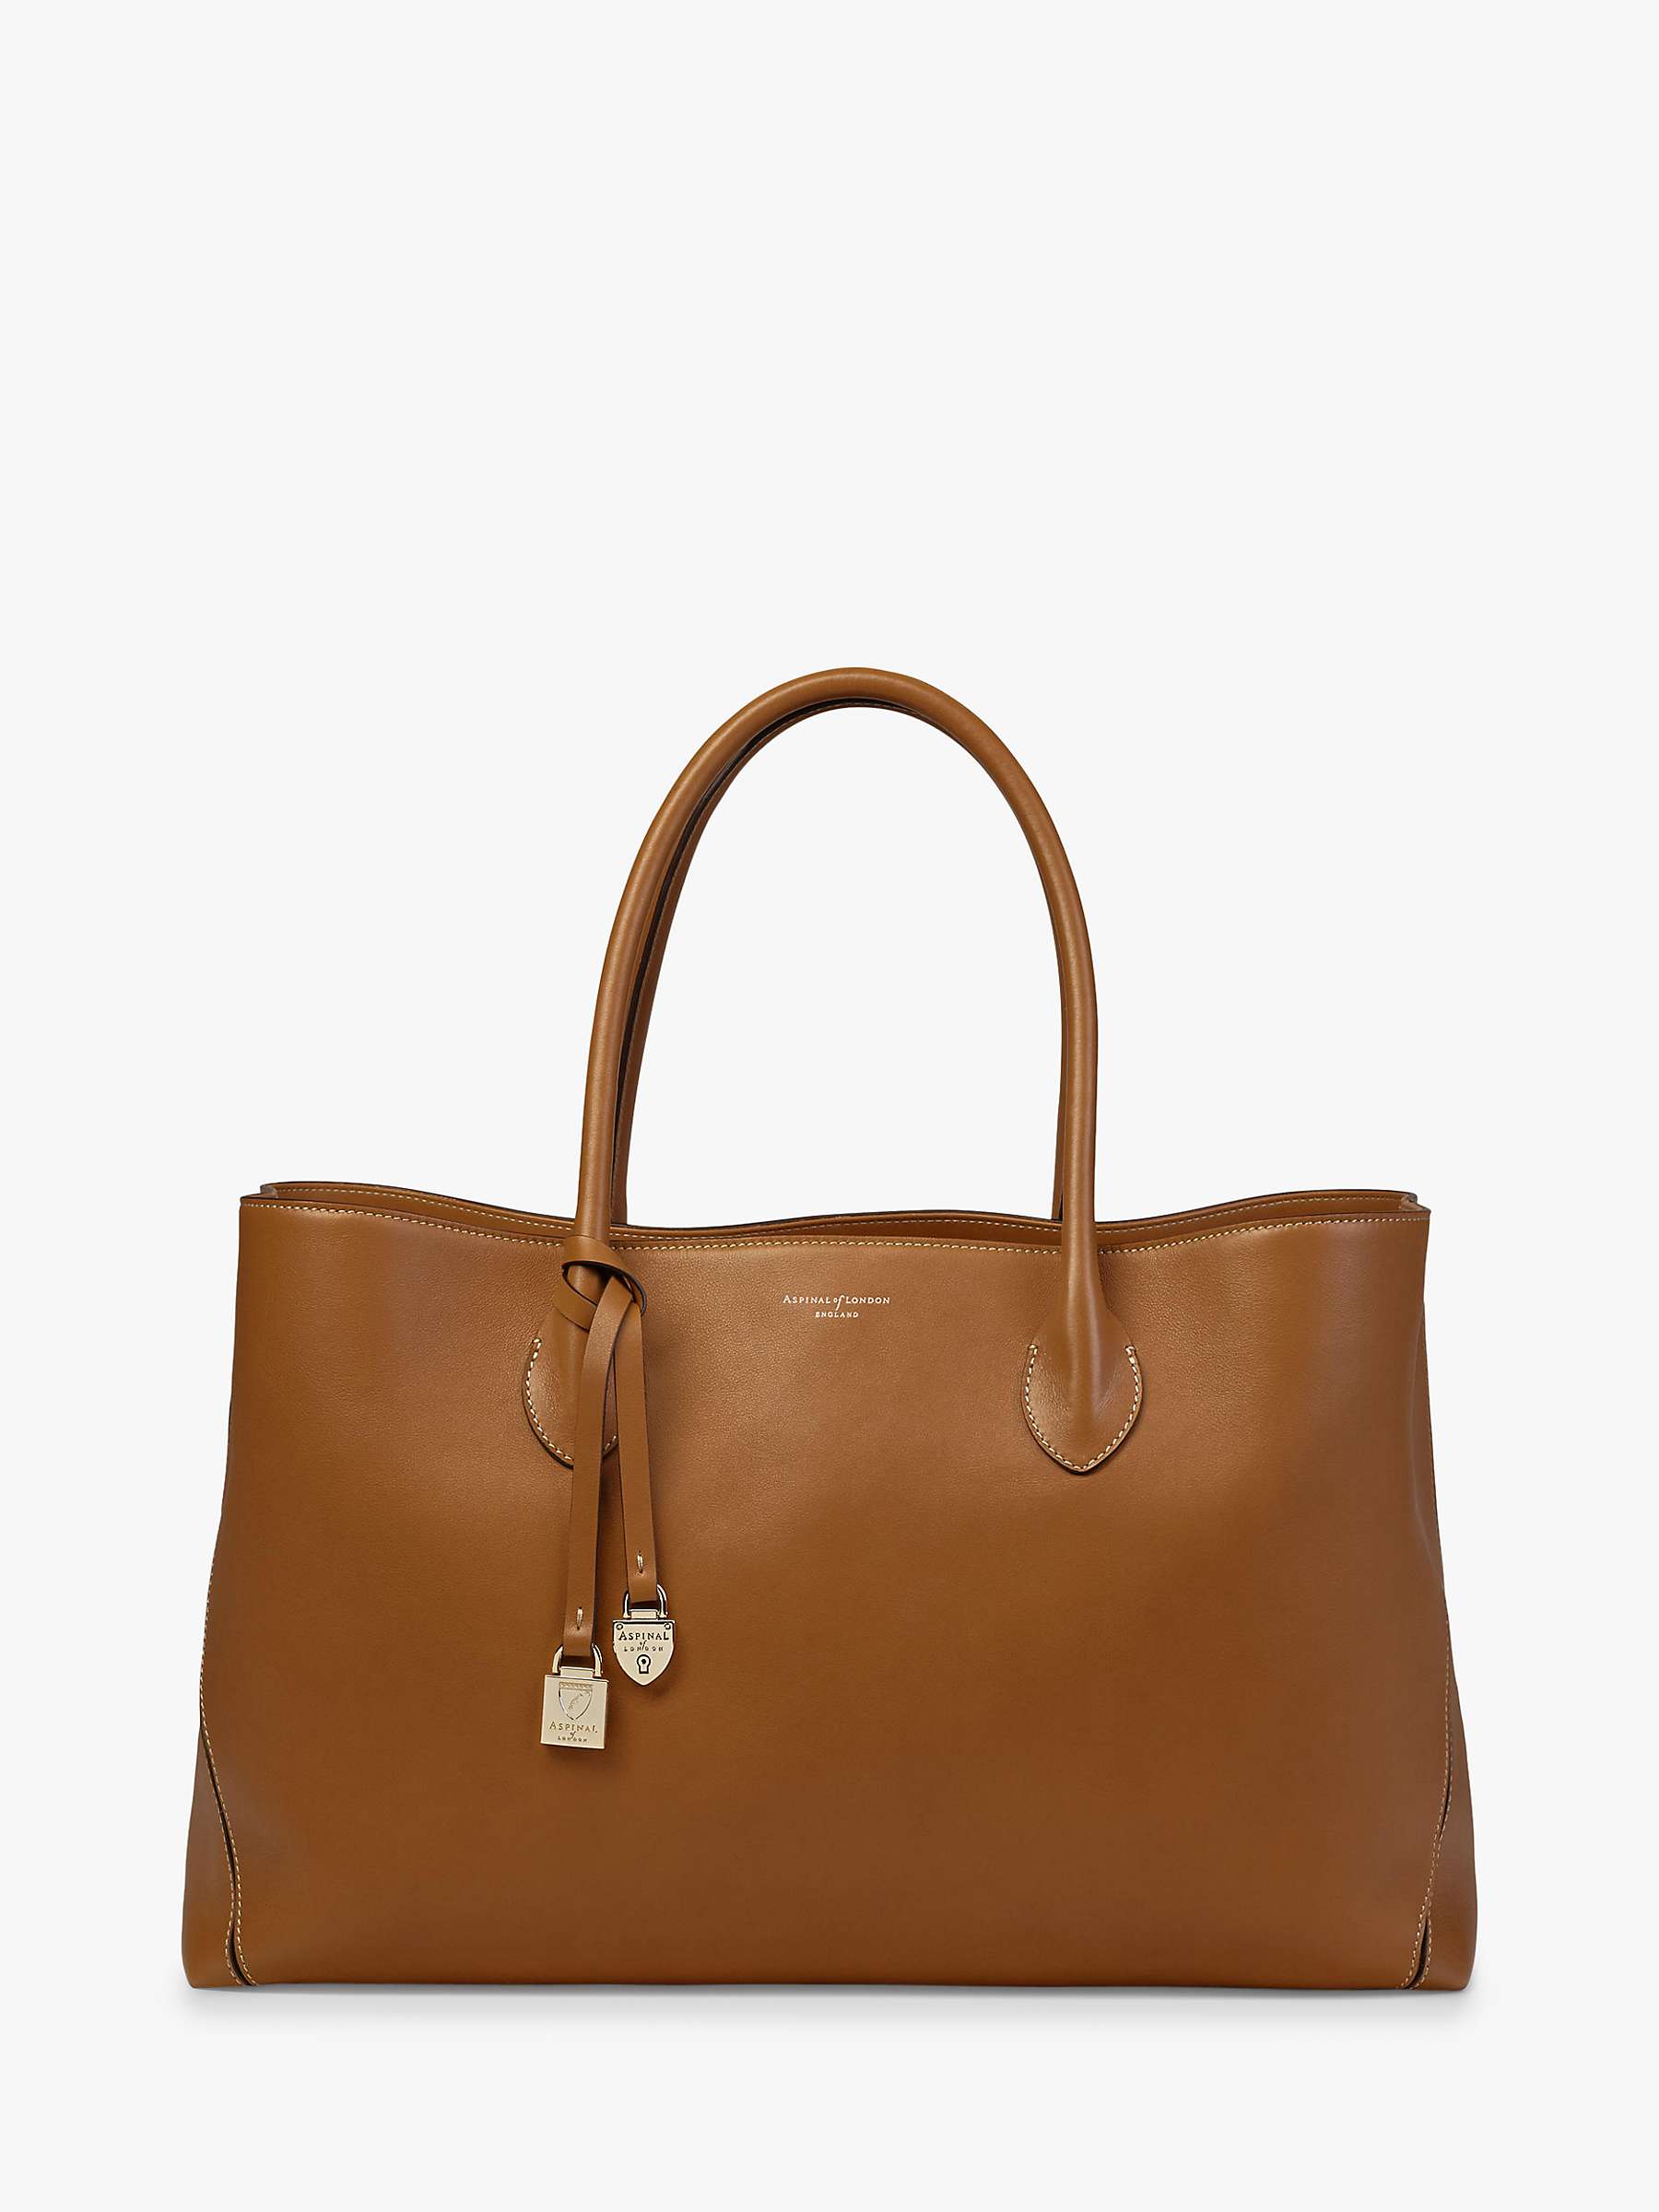 Buy Aspinal of London Large London Smooth Leather Tote Bag, Tan Online at johnlewis.com